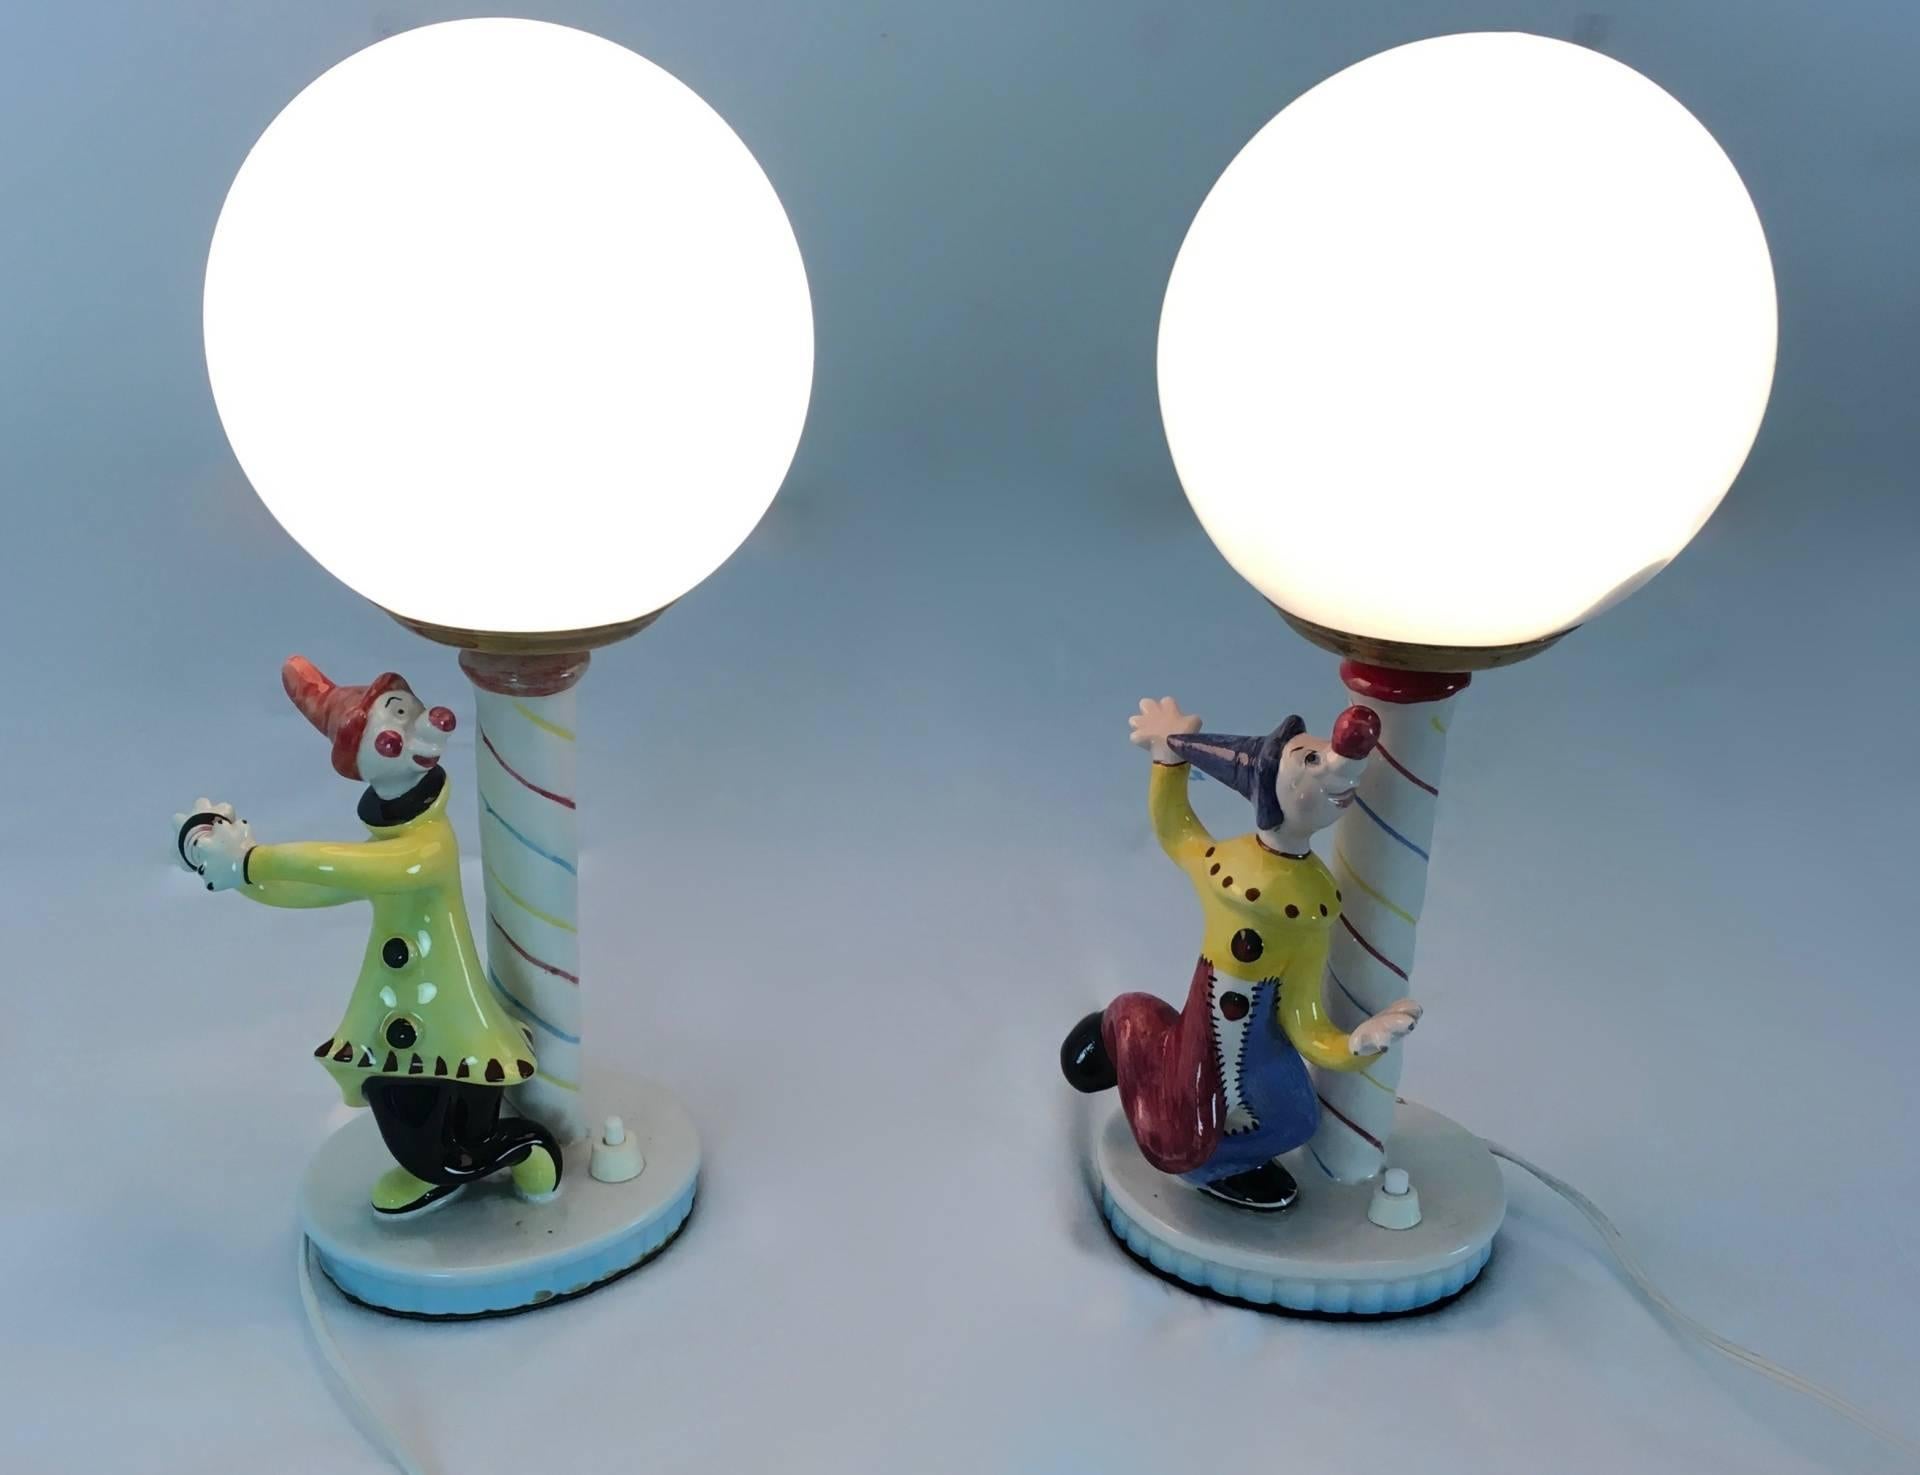 Pair of table lamps, Italy, 1950s. Made in ceramic and opaline glass.
In perfect original condition and ready to give a beautiful ambiance to any room.

Diameter: 15 cm
Height: 33 cm